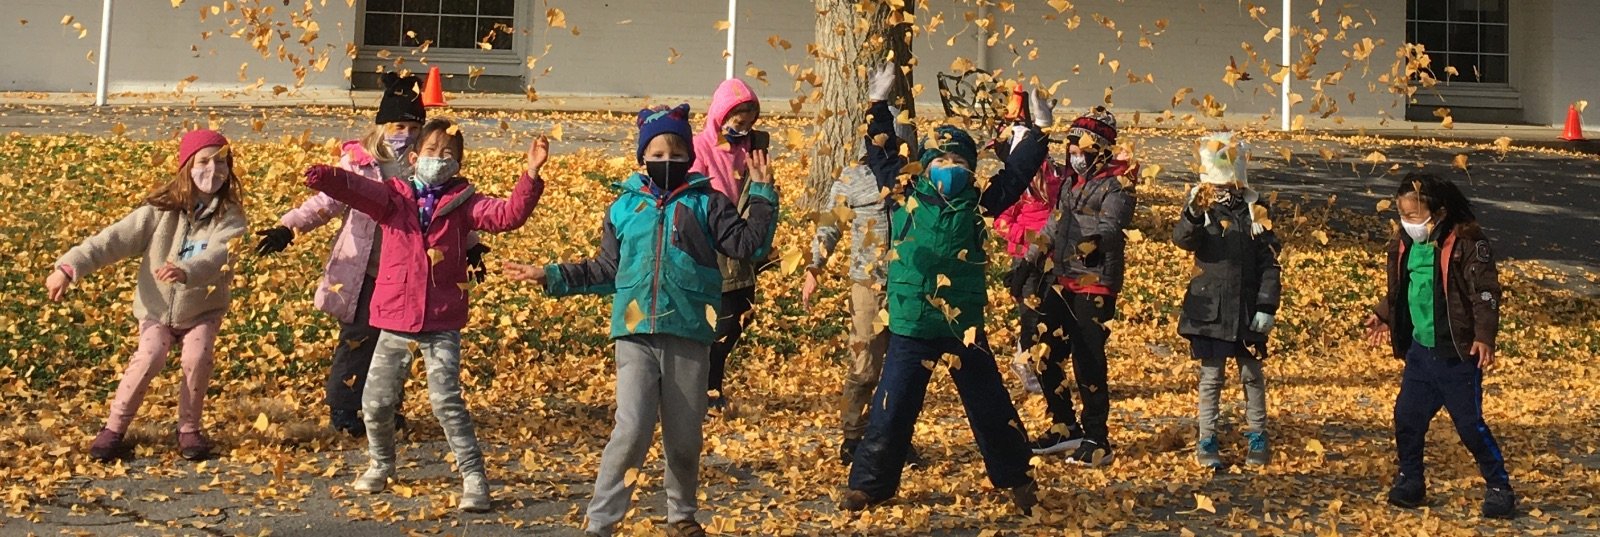 students playing in fallen leaves